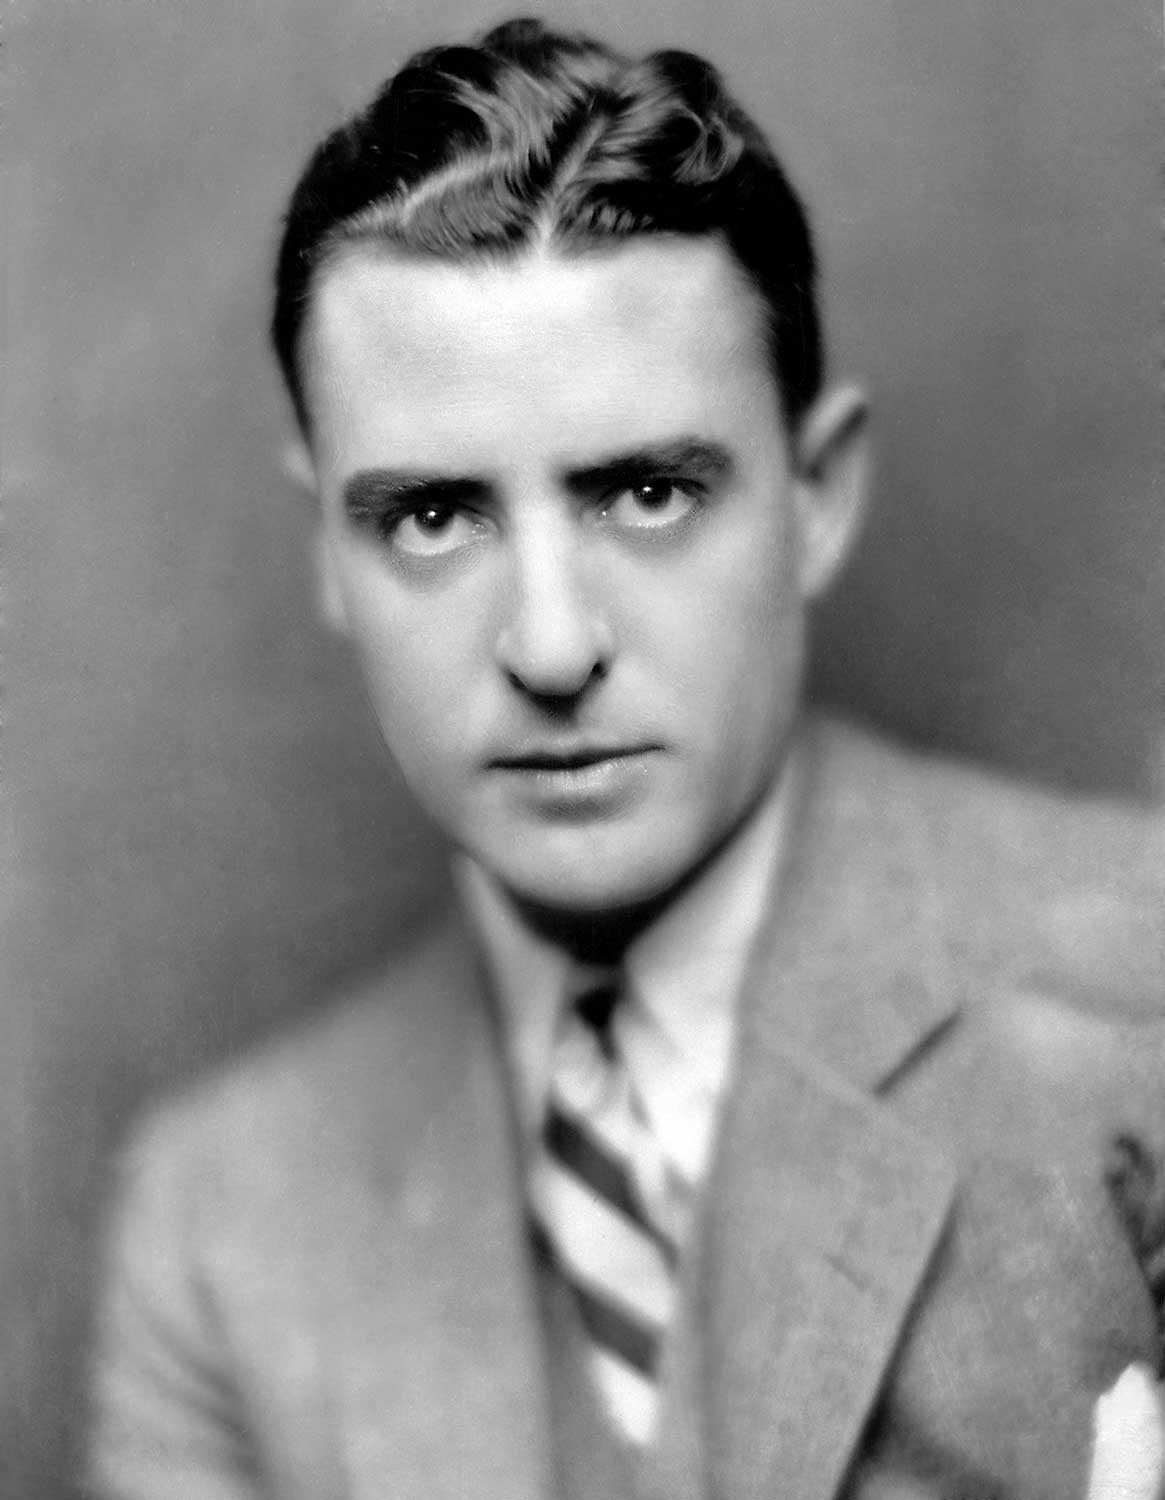 Actor John Gilbert circa 1920s with side part hairstyle